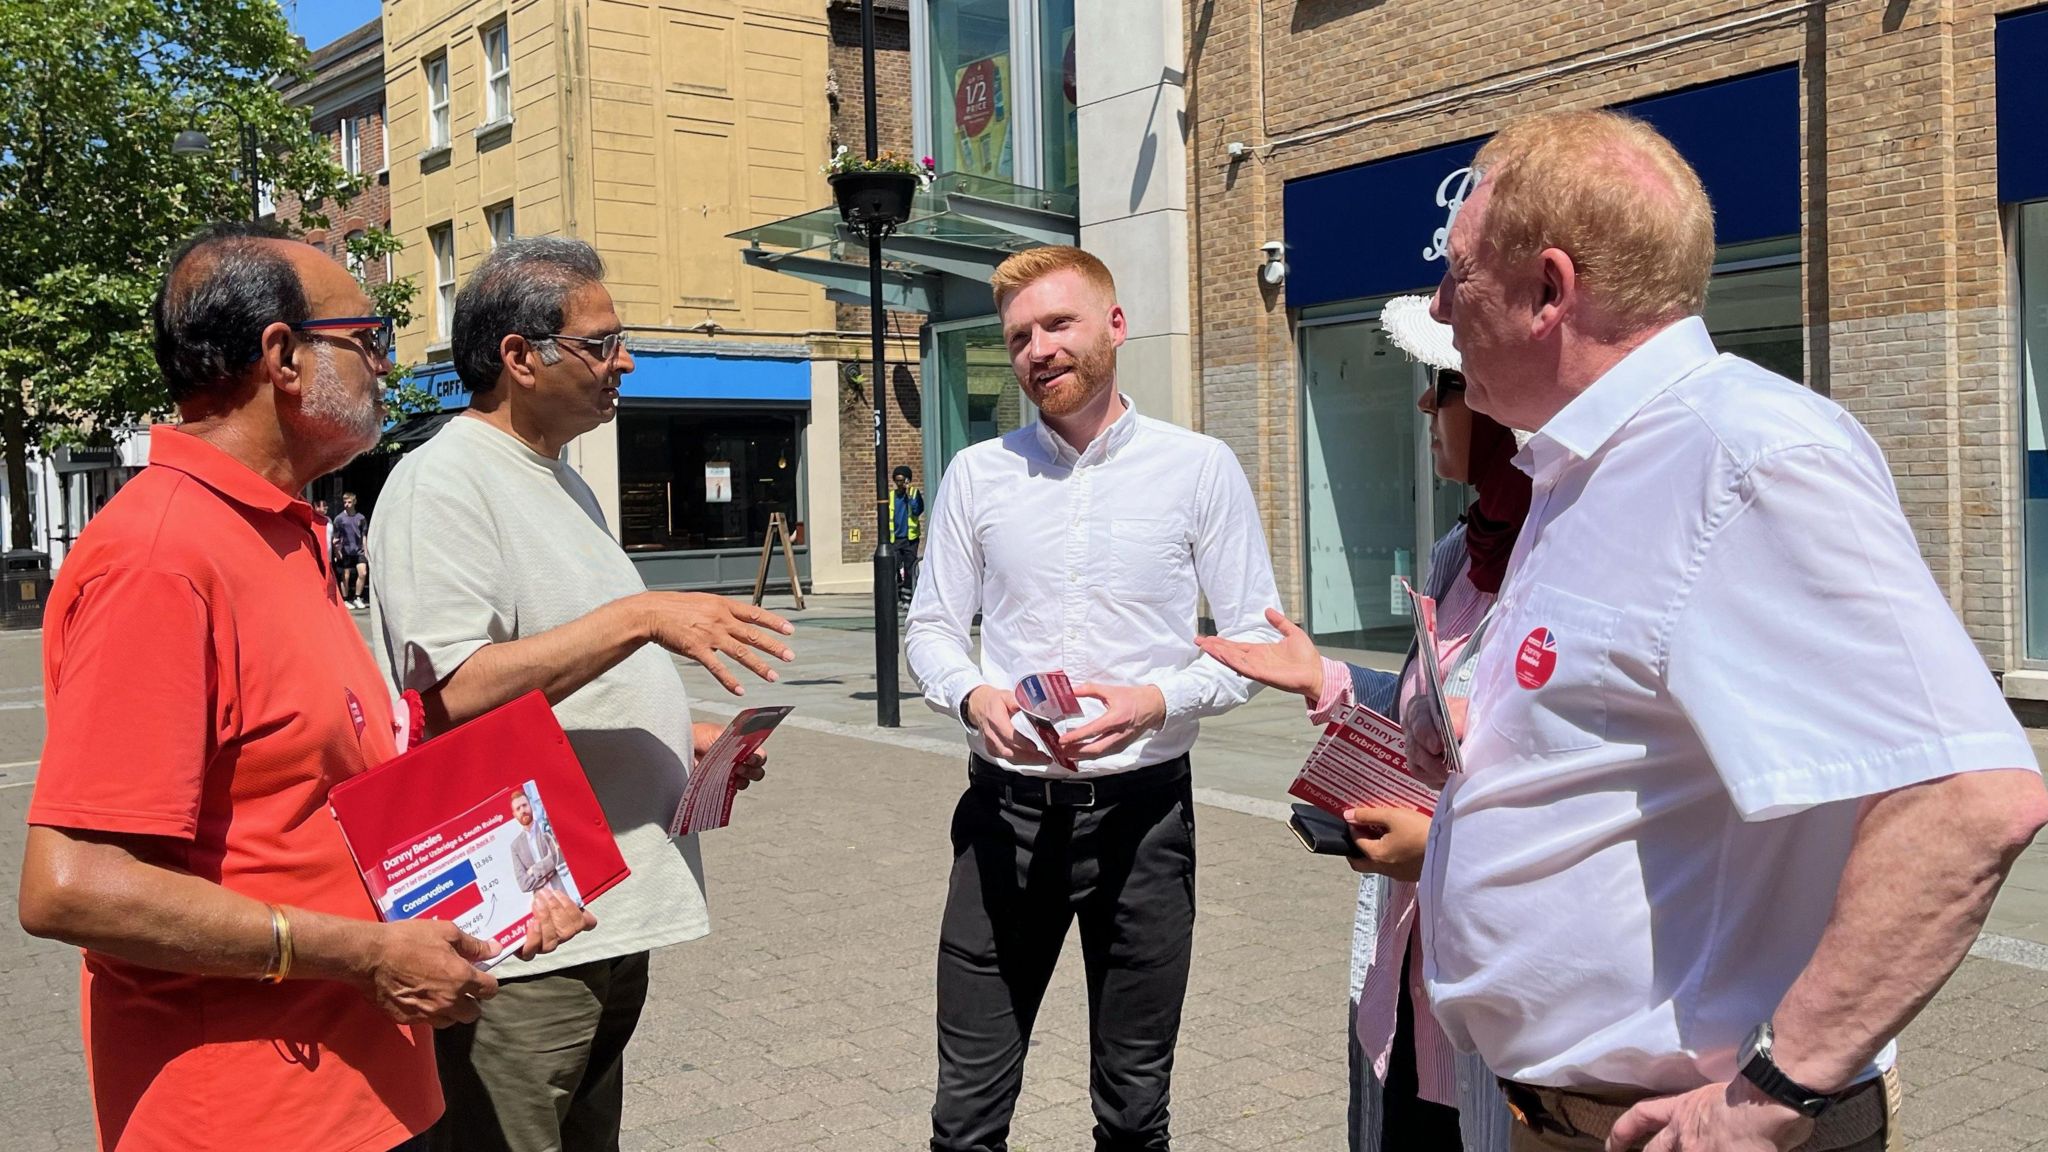 Danny Beales, centre, talking to four canvassers on a high street